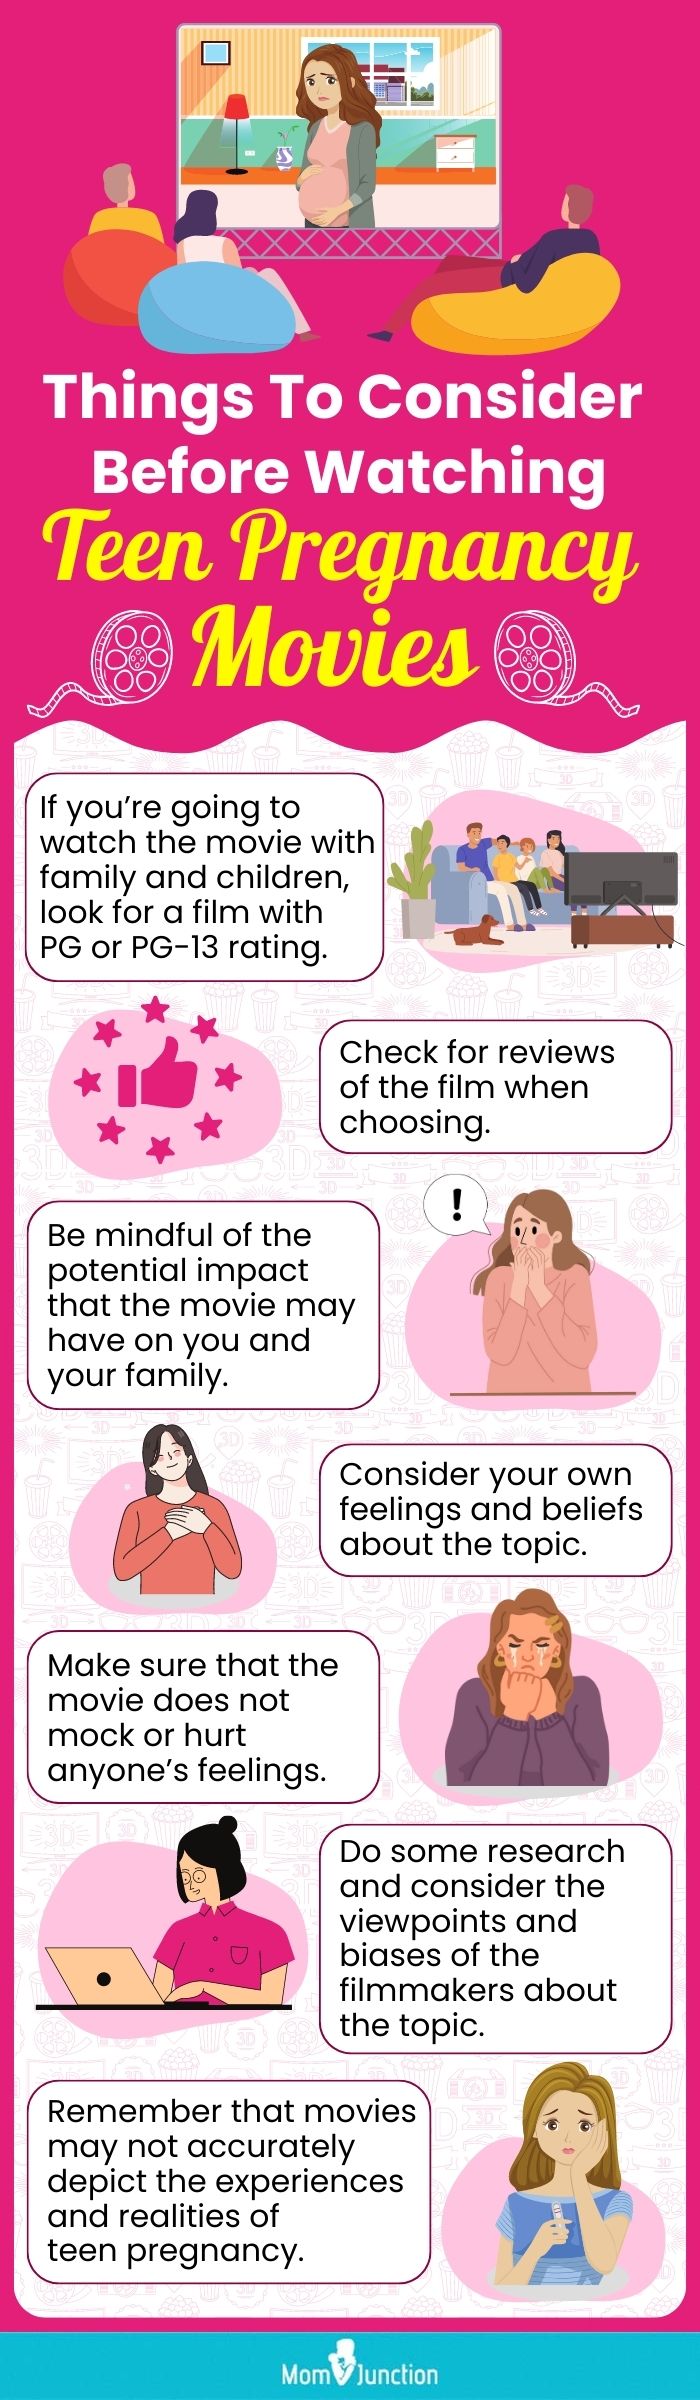 Things To Consider Before Watching Teen Pregnancy Movies (infographic)